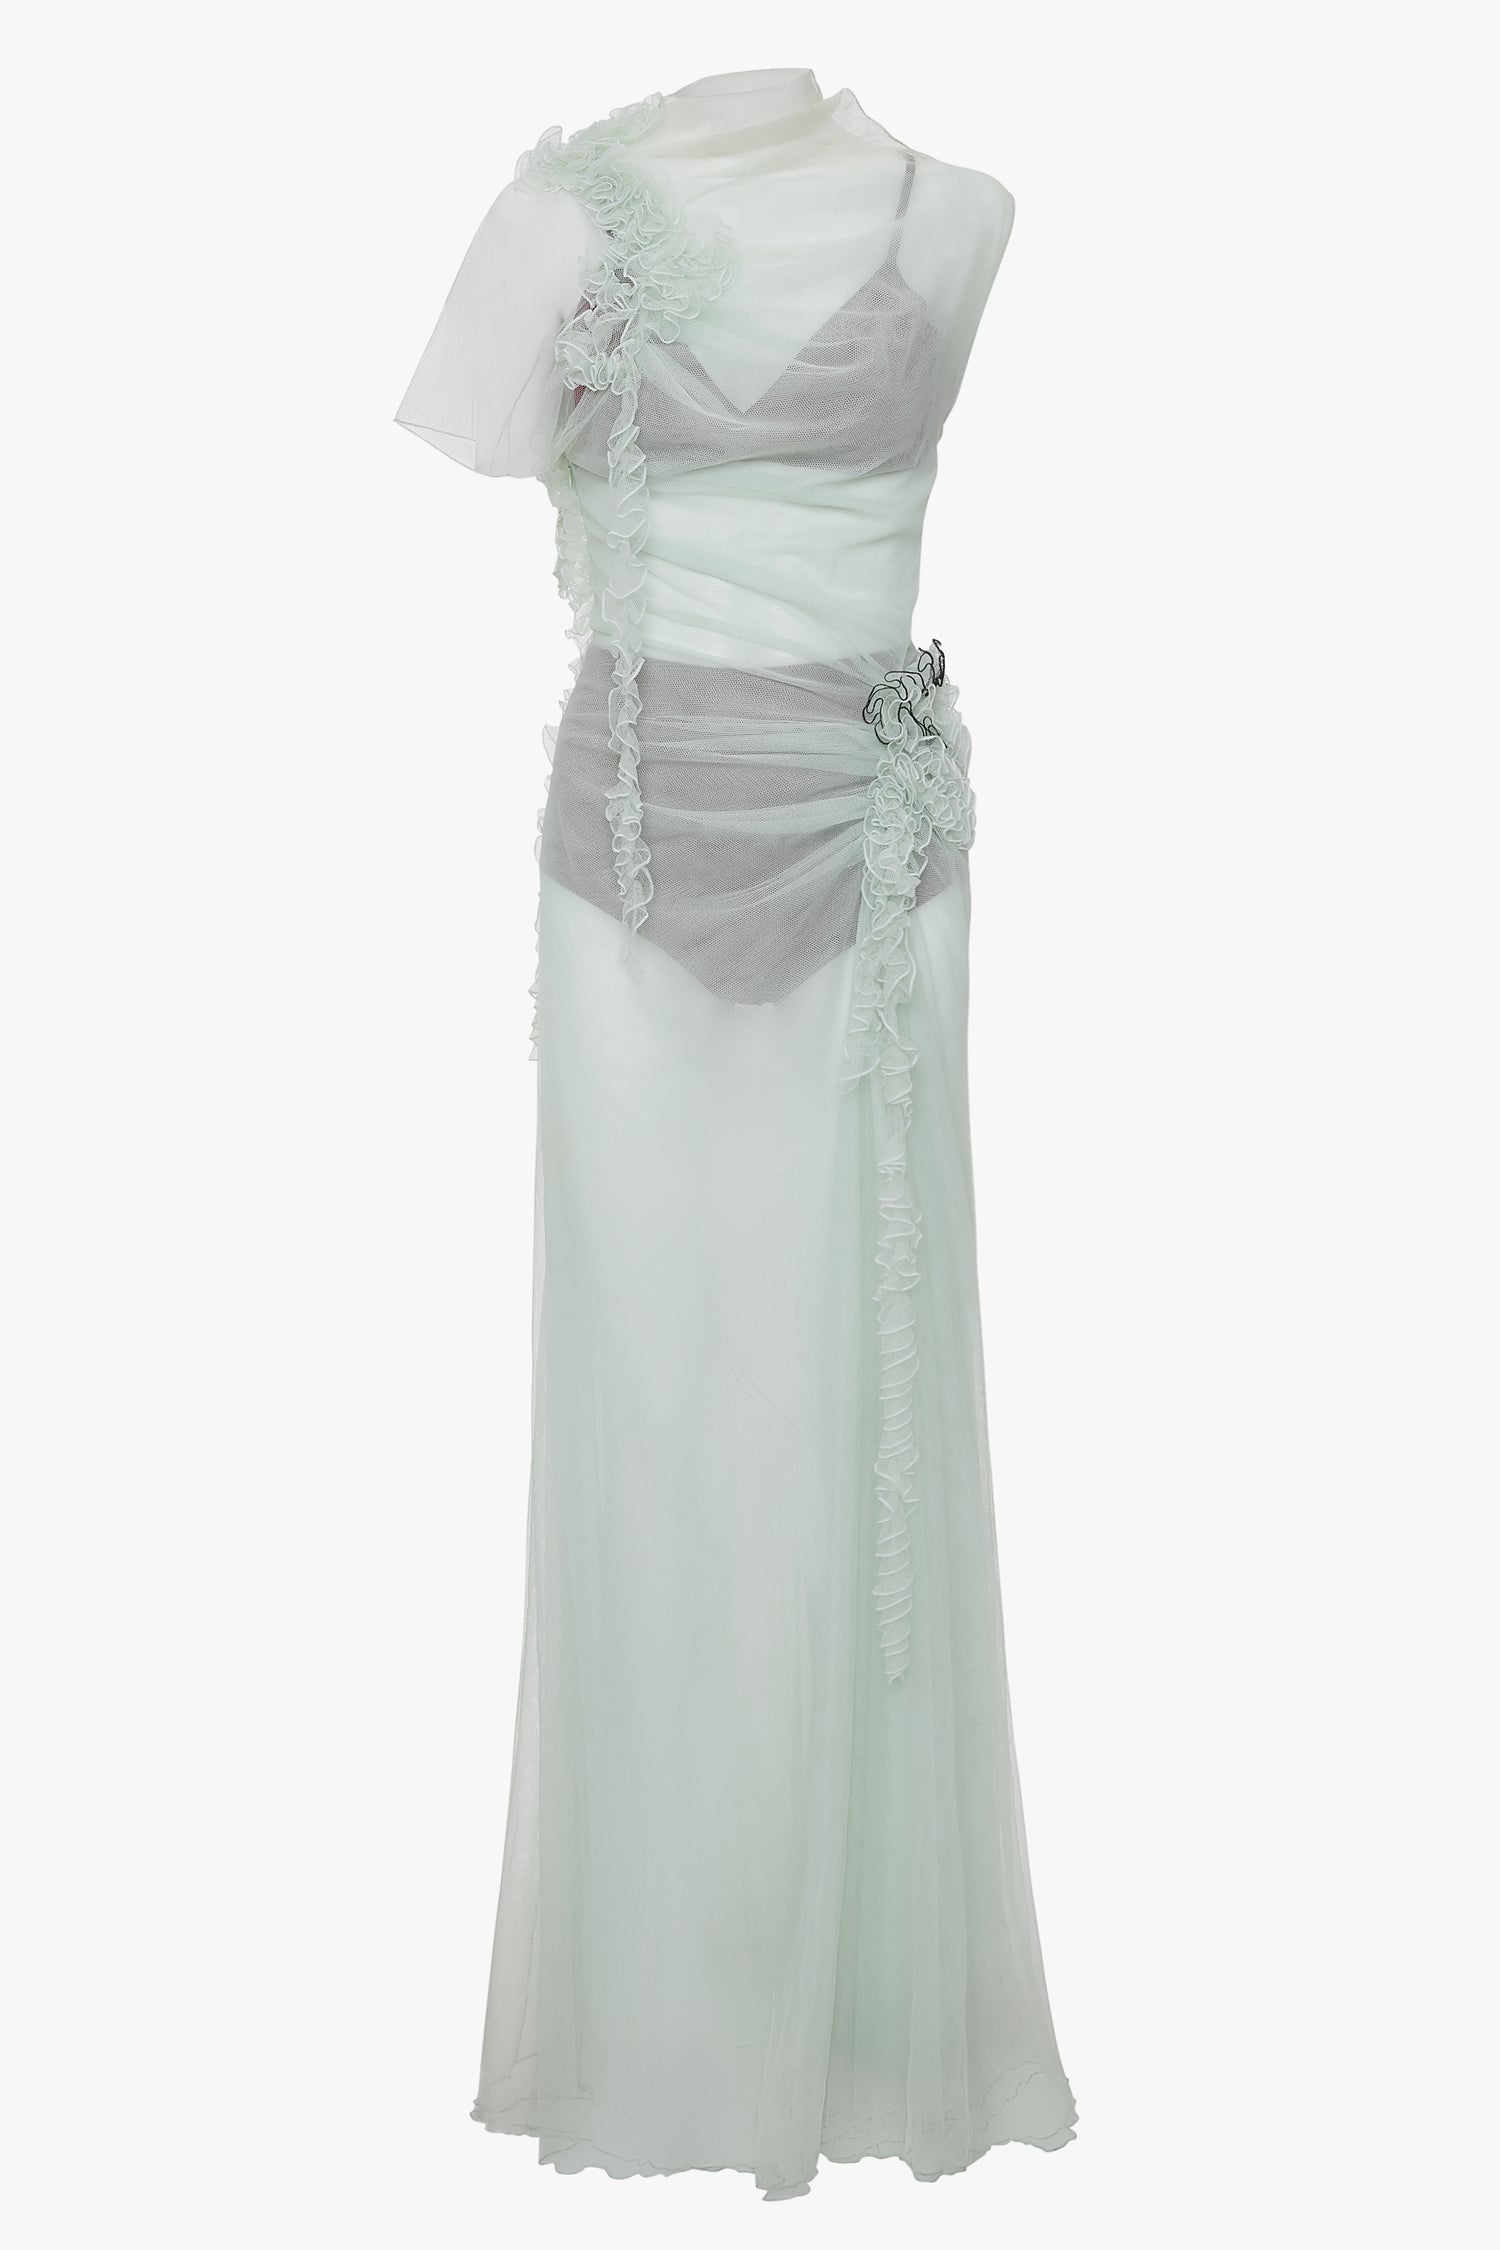 A Victoria Beckham Gathered Tulle Detail Floor-Length Dress In Jade with sheer and ruffled detailing, featuring one short sleeve and a cinched waist with floral ruche detailing for an ethereal gown look.